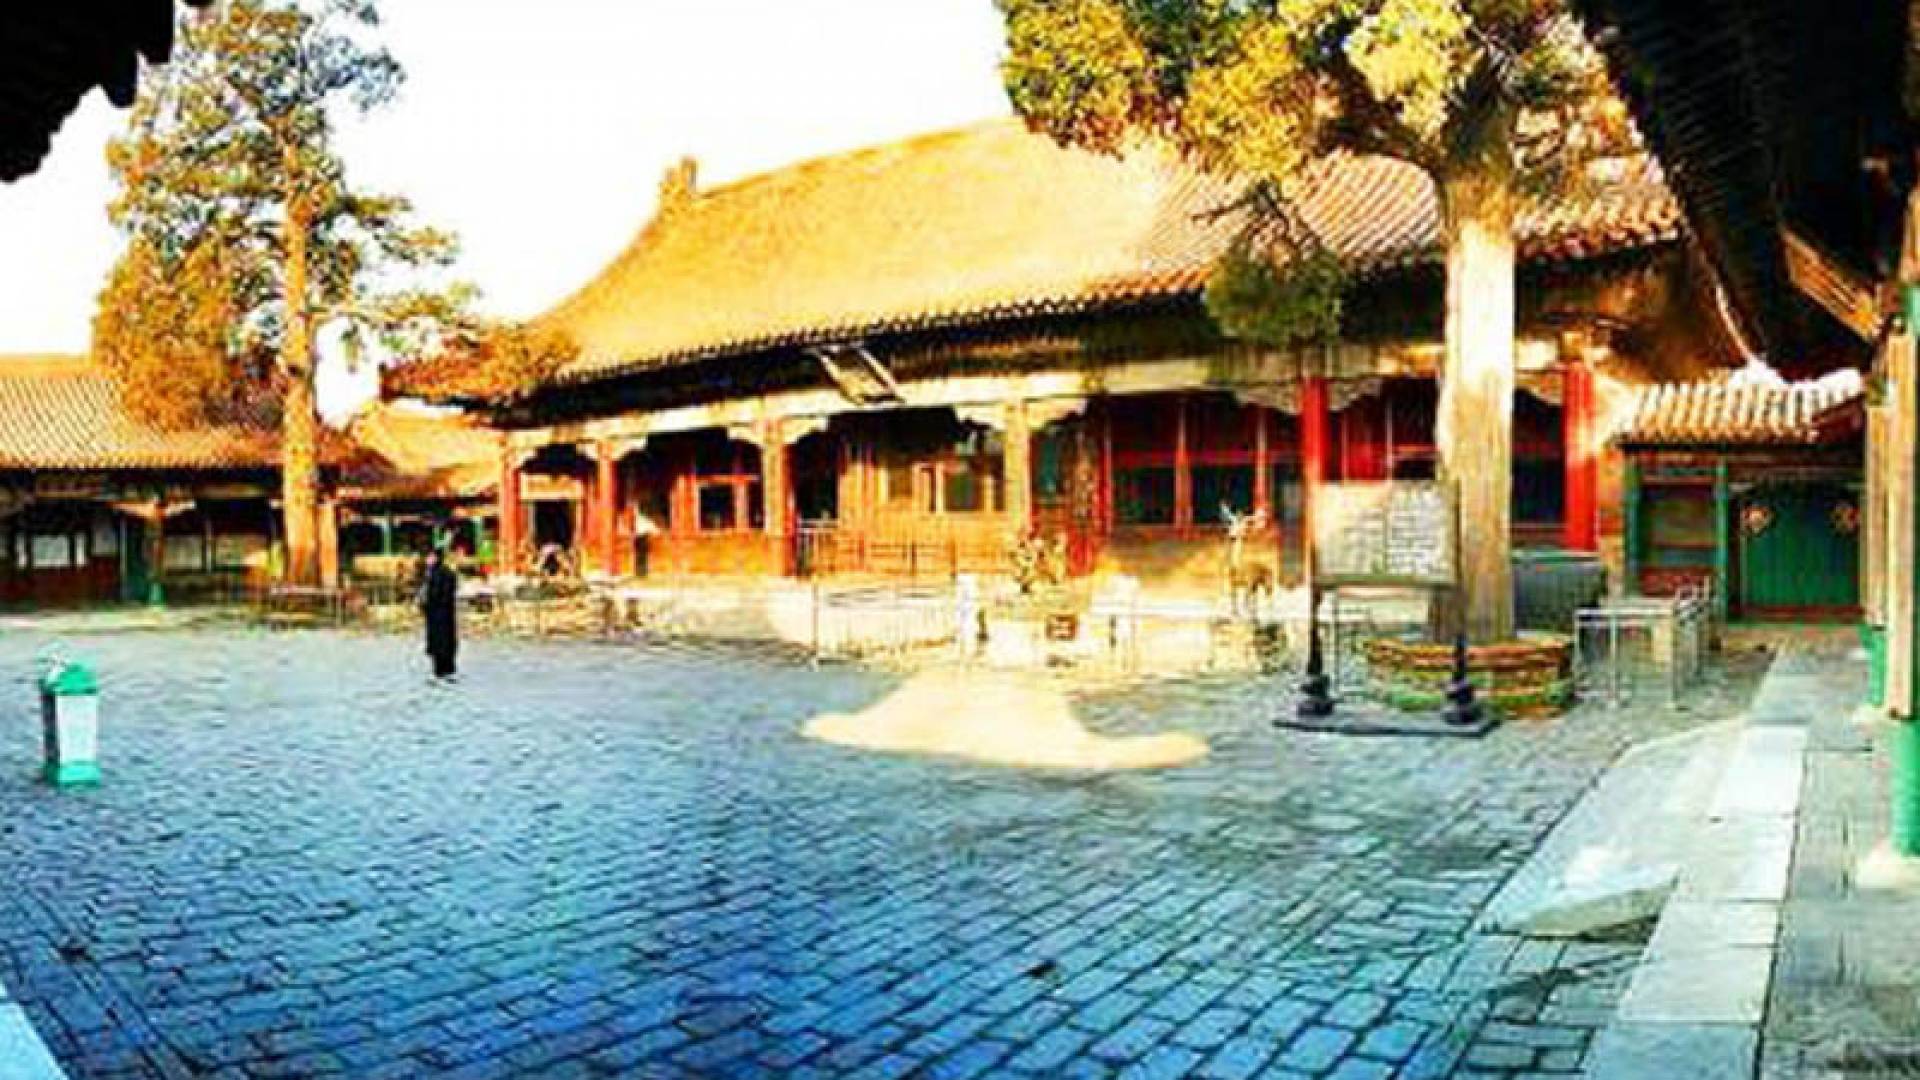 THE FORBIDDEN CITY, Buildings West Side I